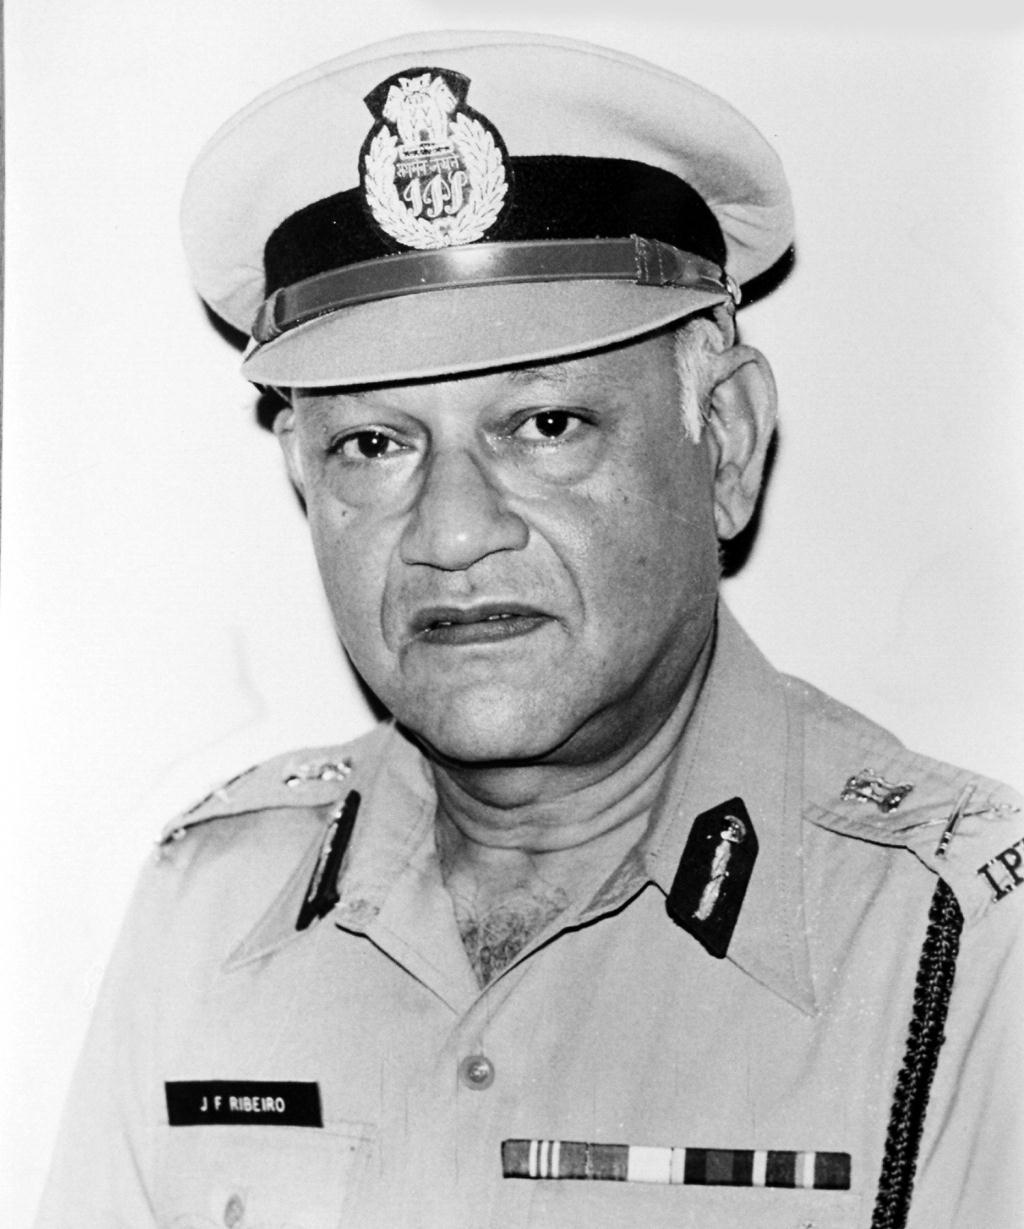 DGP Punjab, and is a former Indian